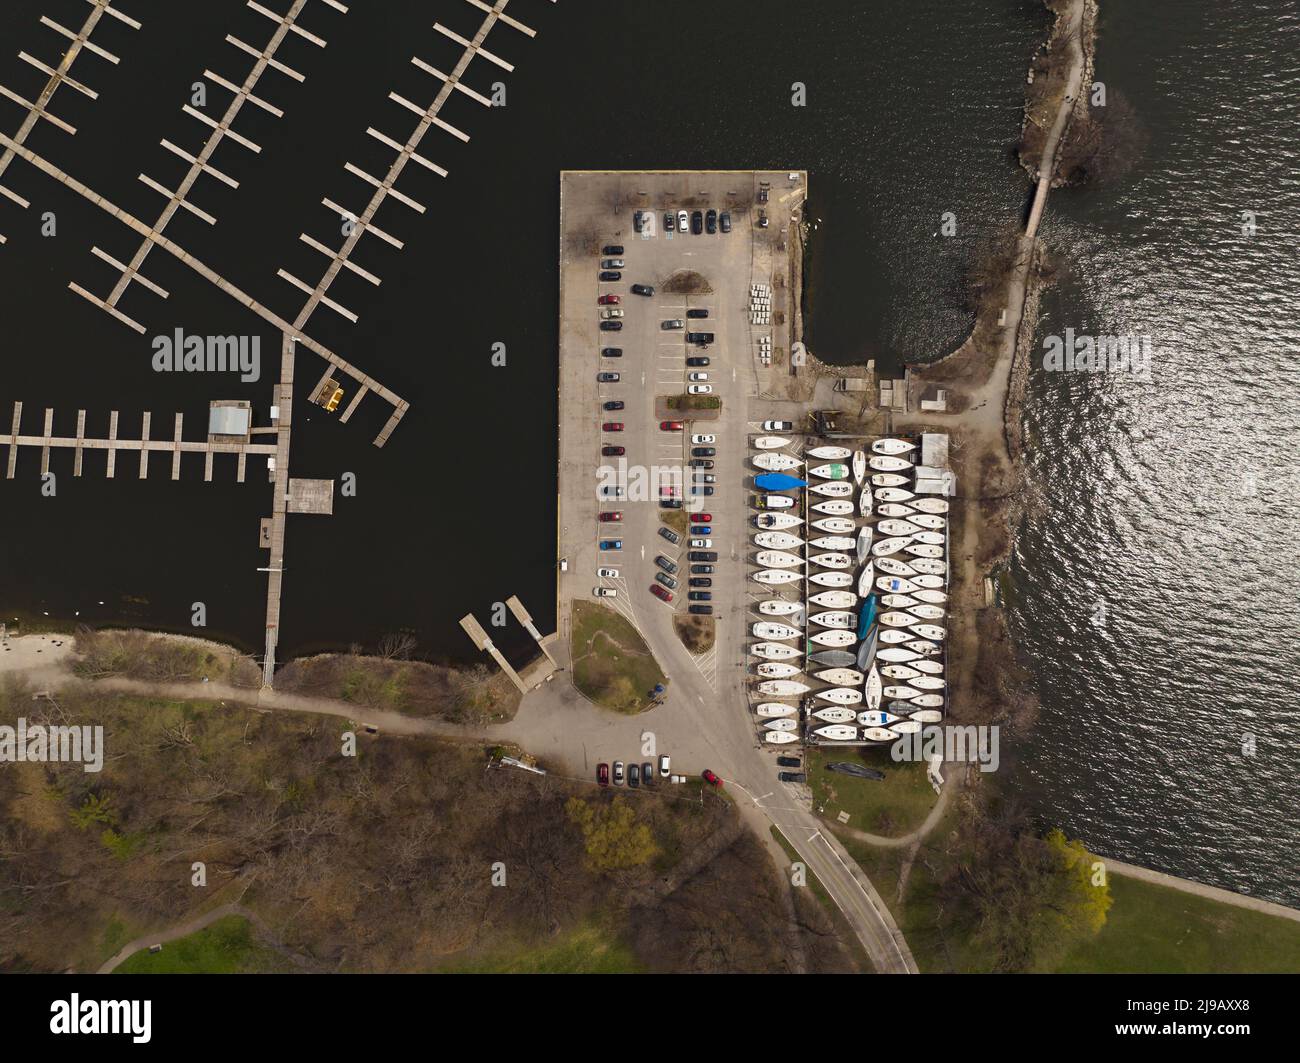 An aerial view above a large boat harbor, seen during the offseason with any empty water harbor and boats seen on land storage. Stock Photo